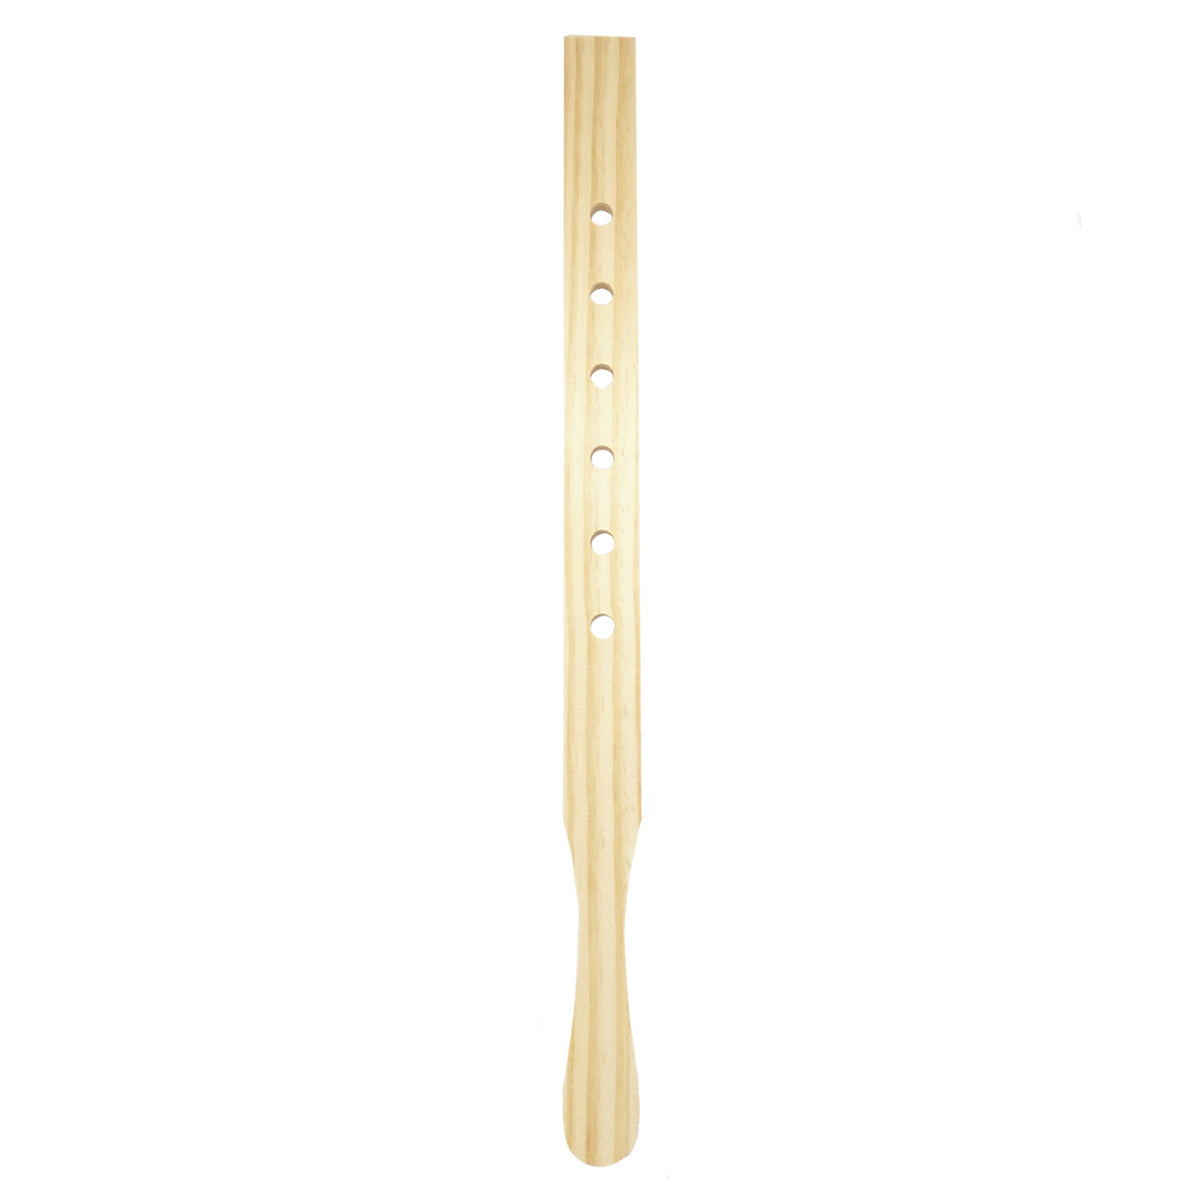 Wooden Paint Stirrer with Holes